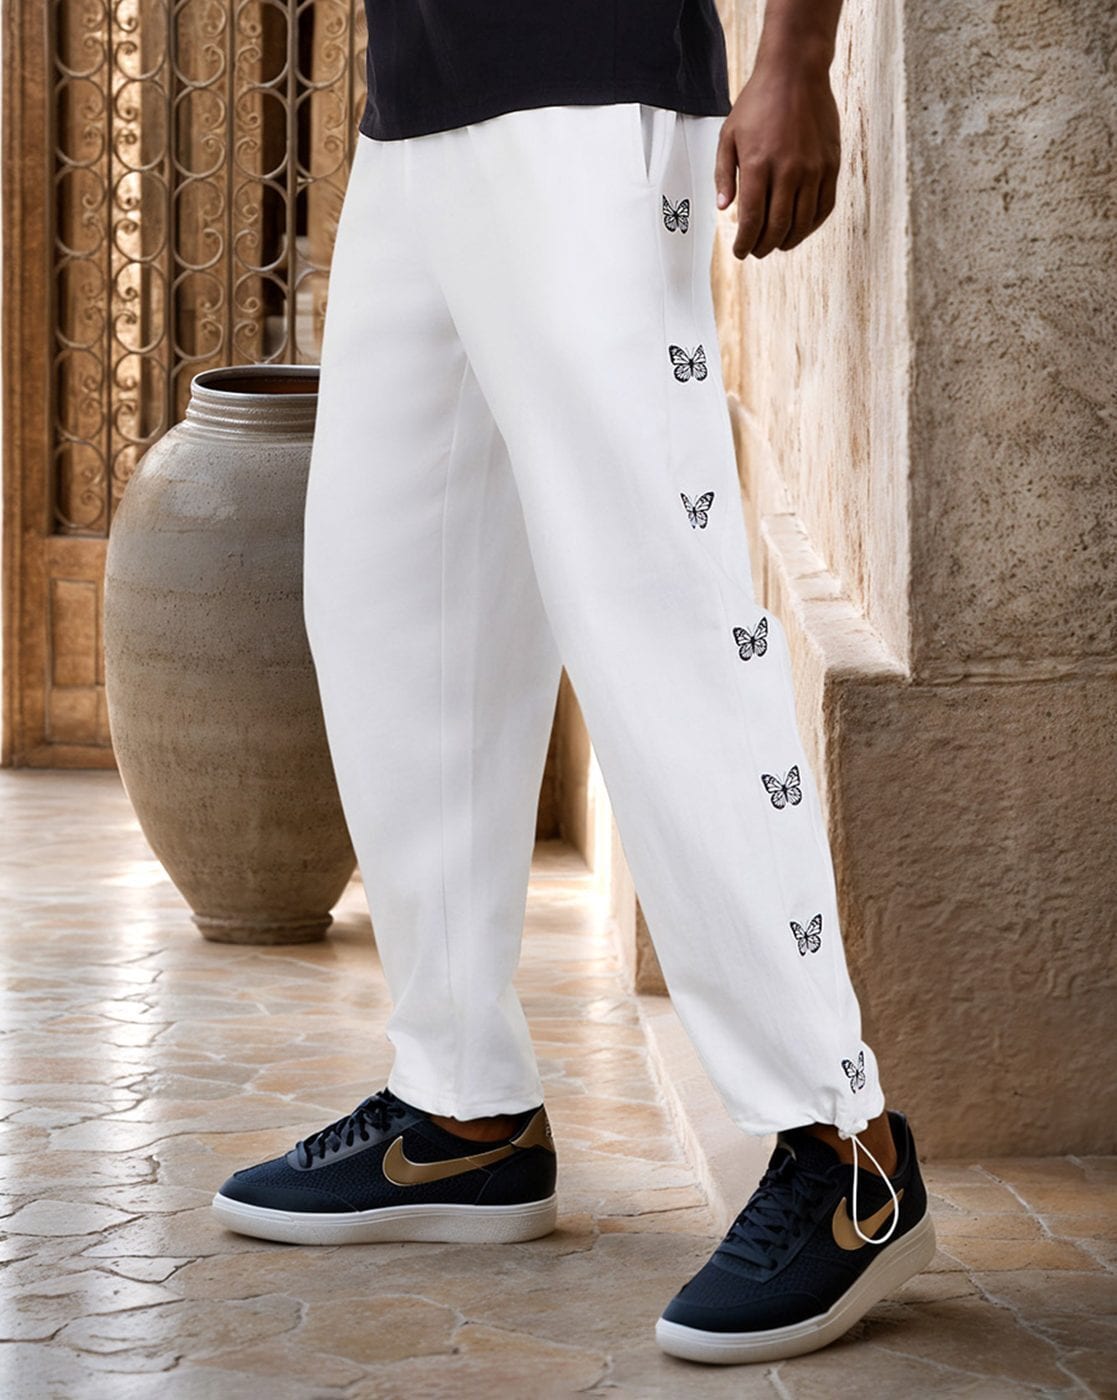 Buy White Track Pants for Men by Styli Online